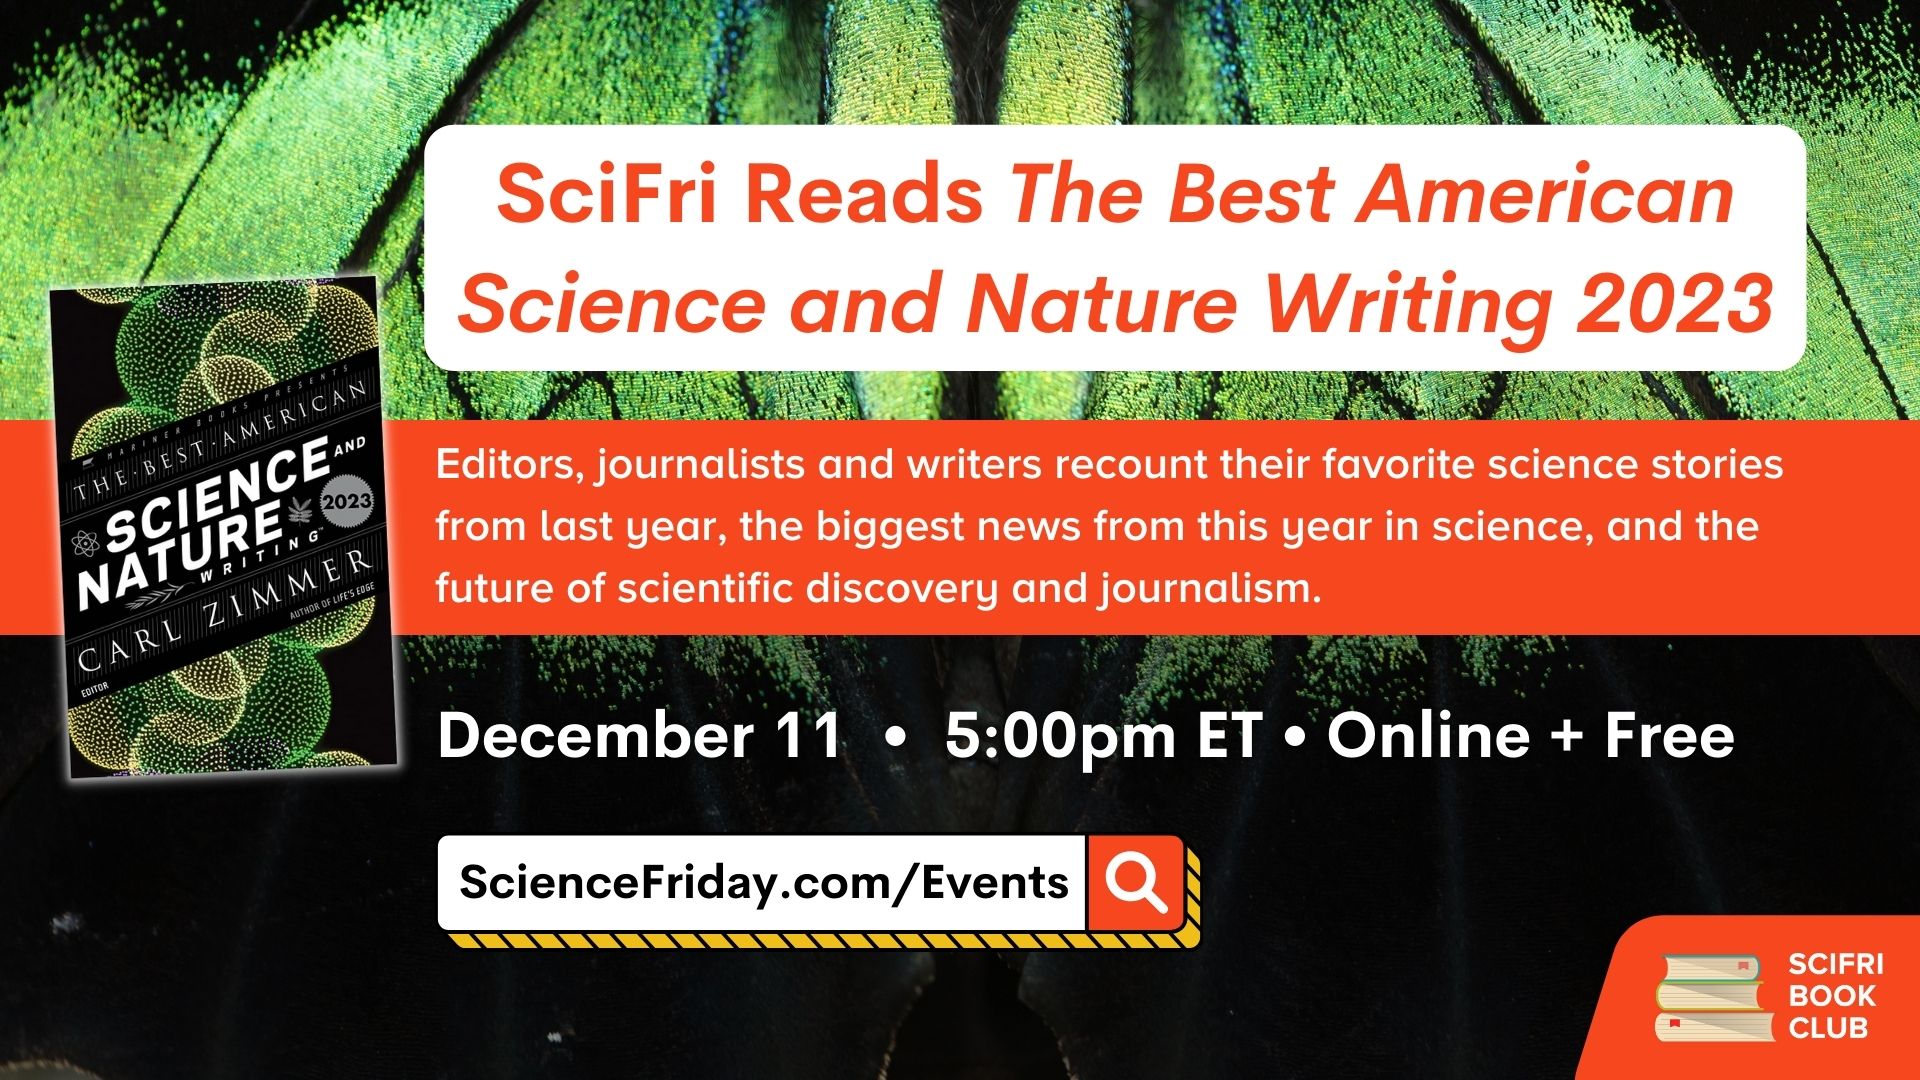 Event promotional image. In the bottom right corner, SciFri Book Club logo, with event info above, which reads: "SciFri Reads The Best American Science and Nature Writing 2023. Editors, journalists and writers recount their favorite science stories from last year, the biggest news from this year in science, and the future of scientific discovery and journalism. December 11, 5:00pm ET, Online + Free, ScienceFriday.com/Events." To the left of the frame is the book cover of THE BEST AMERICAN SCIENCE AND NATURE WRITING 2023. The background is a close-up photo of a green-and-black butterfly wing.